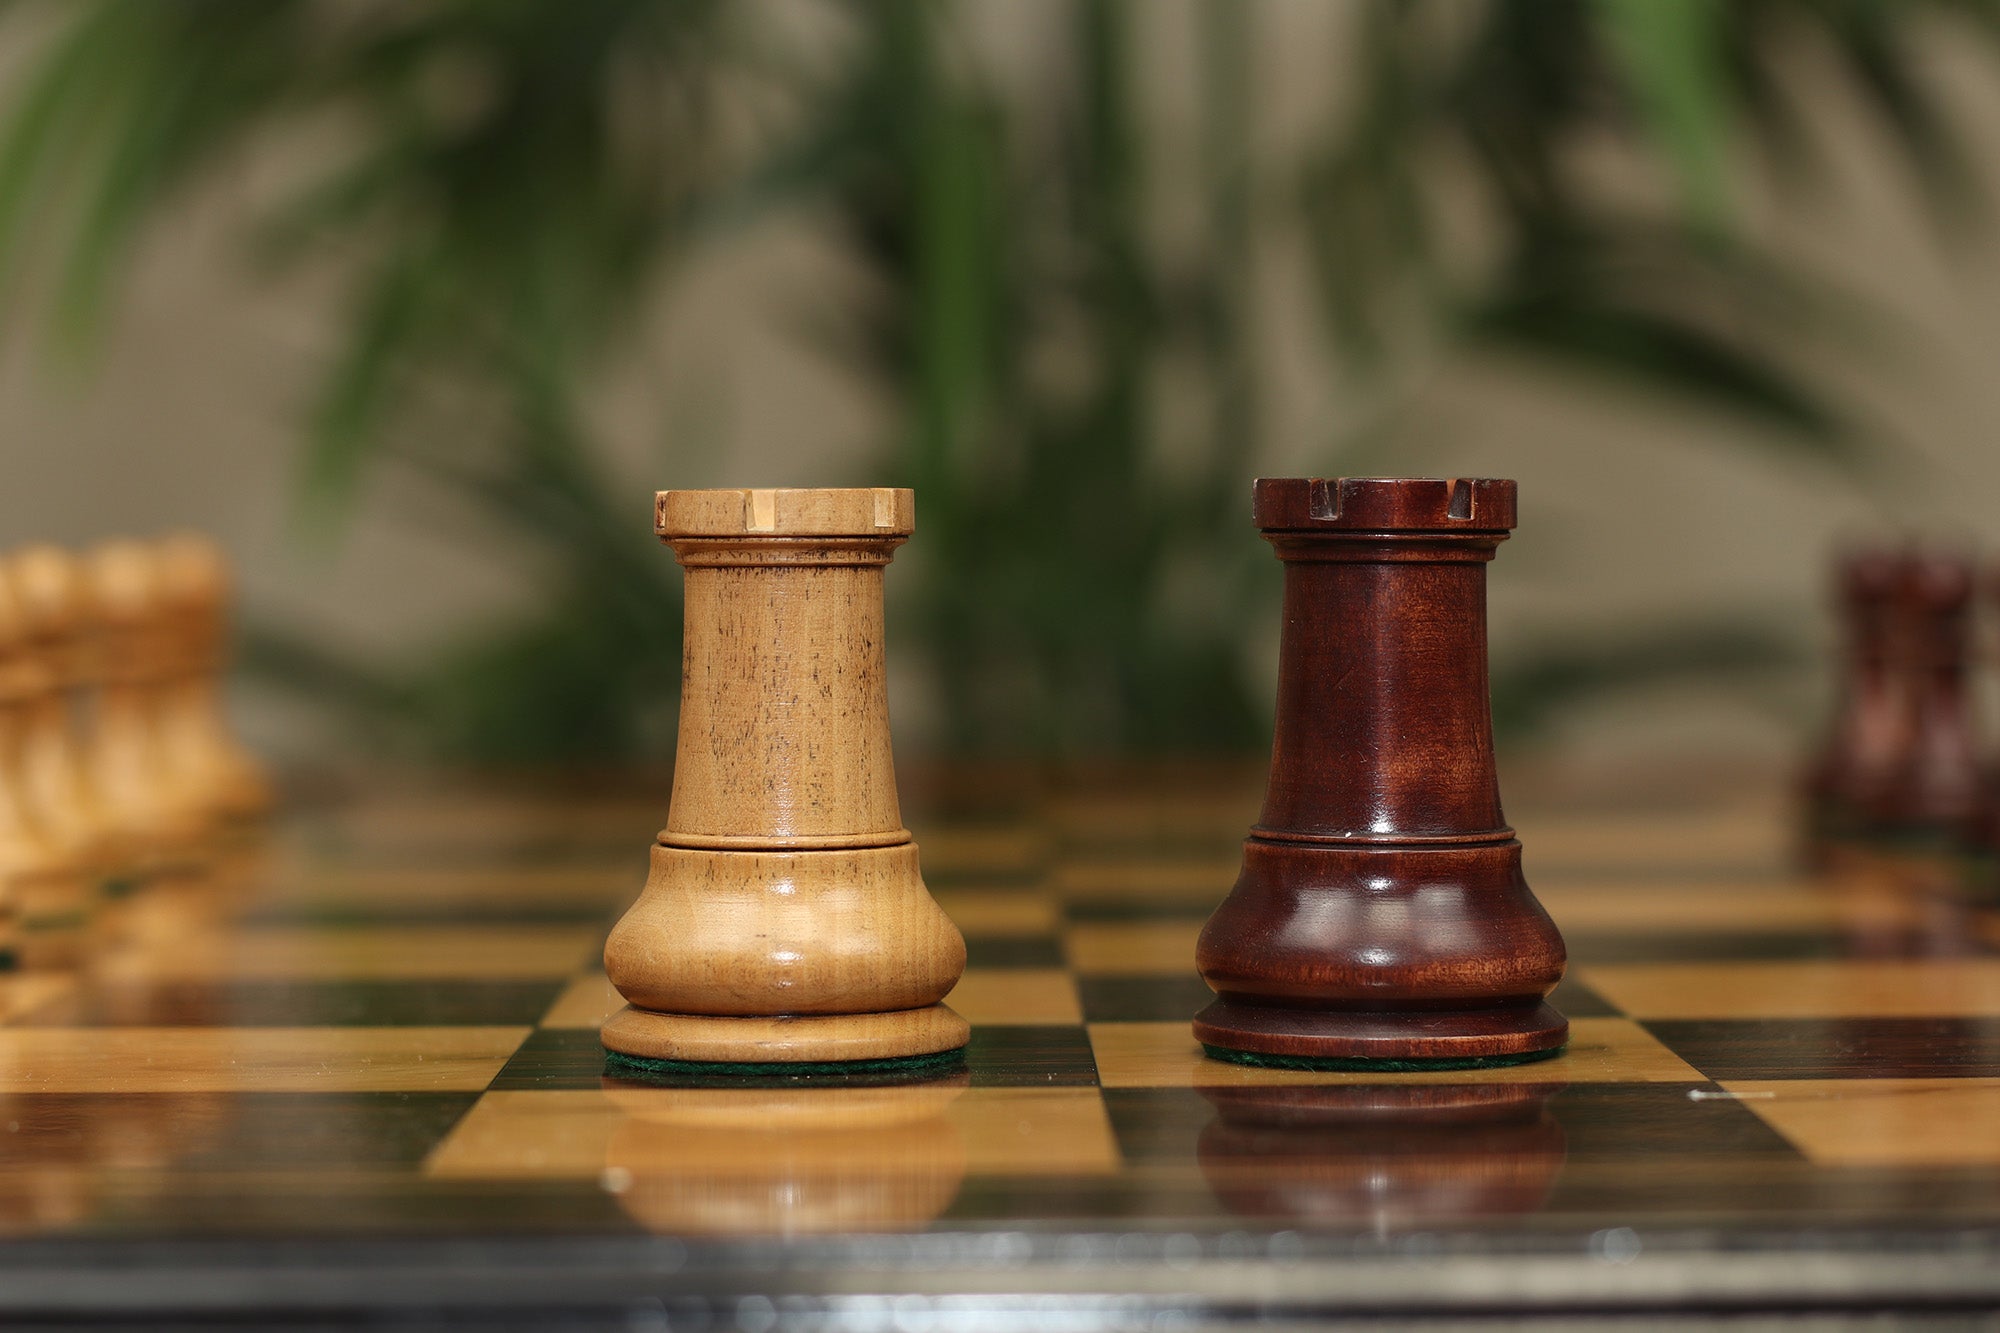 Jaques Reproduction 1870-75 Wooden Chess Pieces in Distressed and Mahogany Boxwood